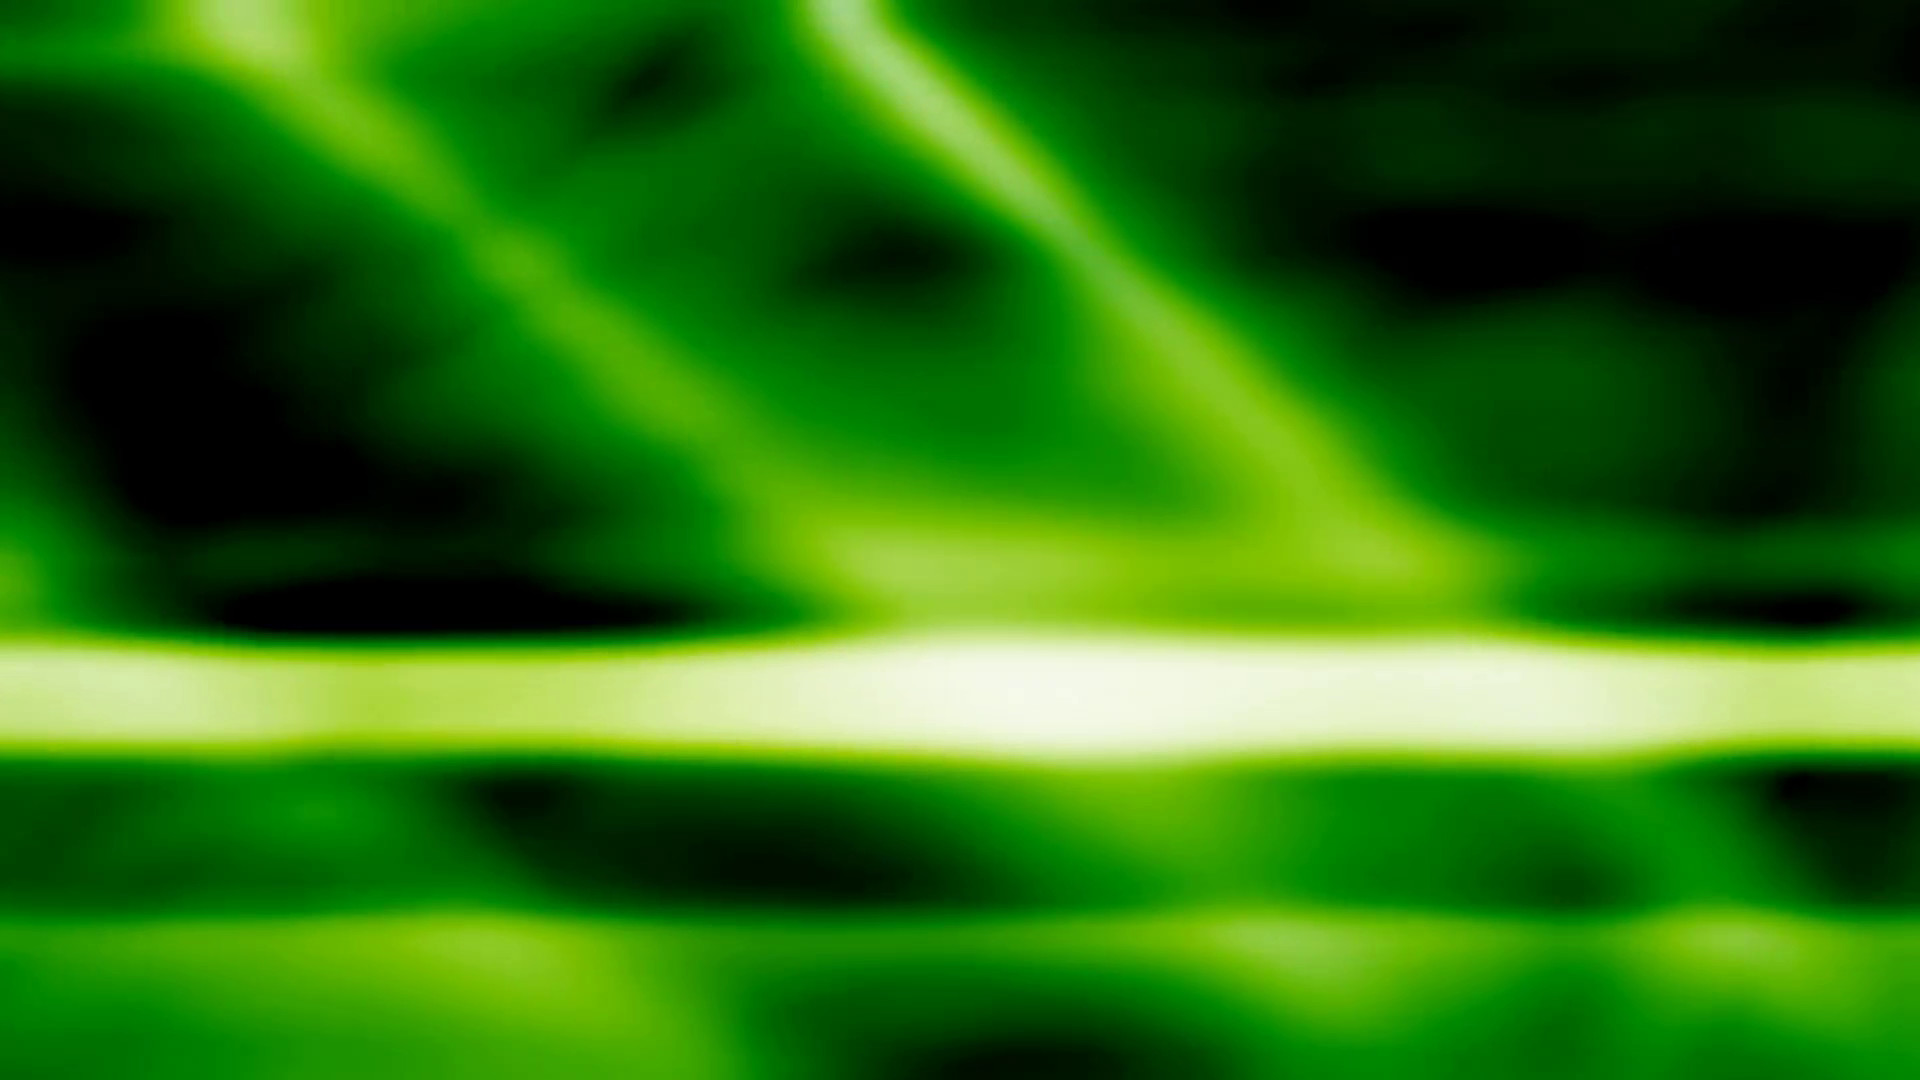 1920x1080 Subscription Library Green and Black Light Waves